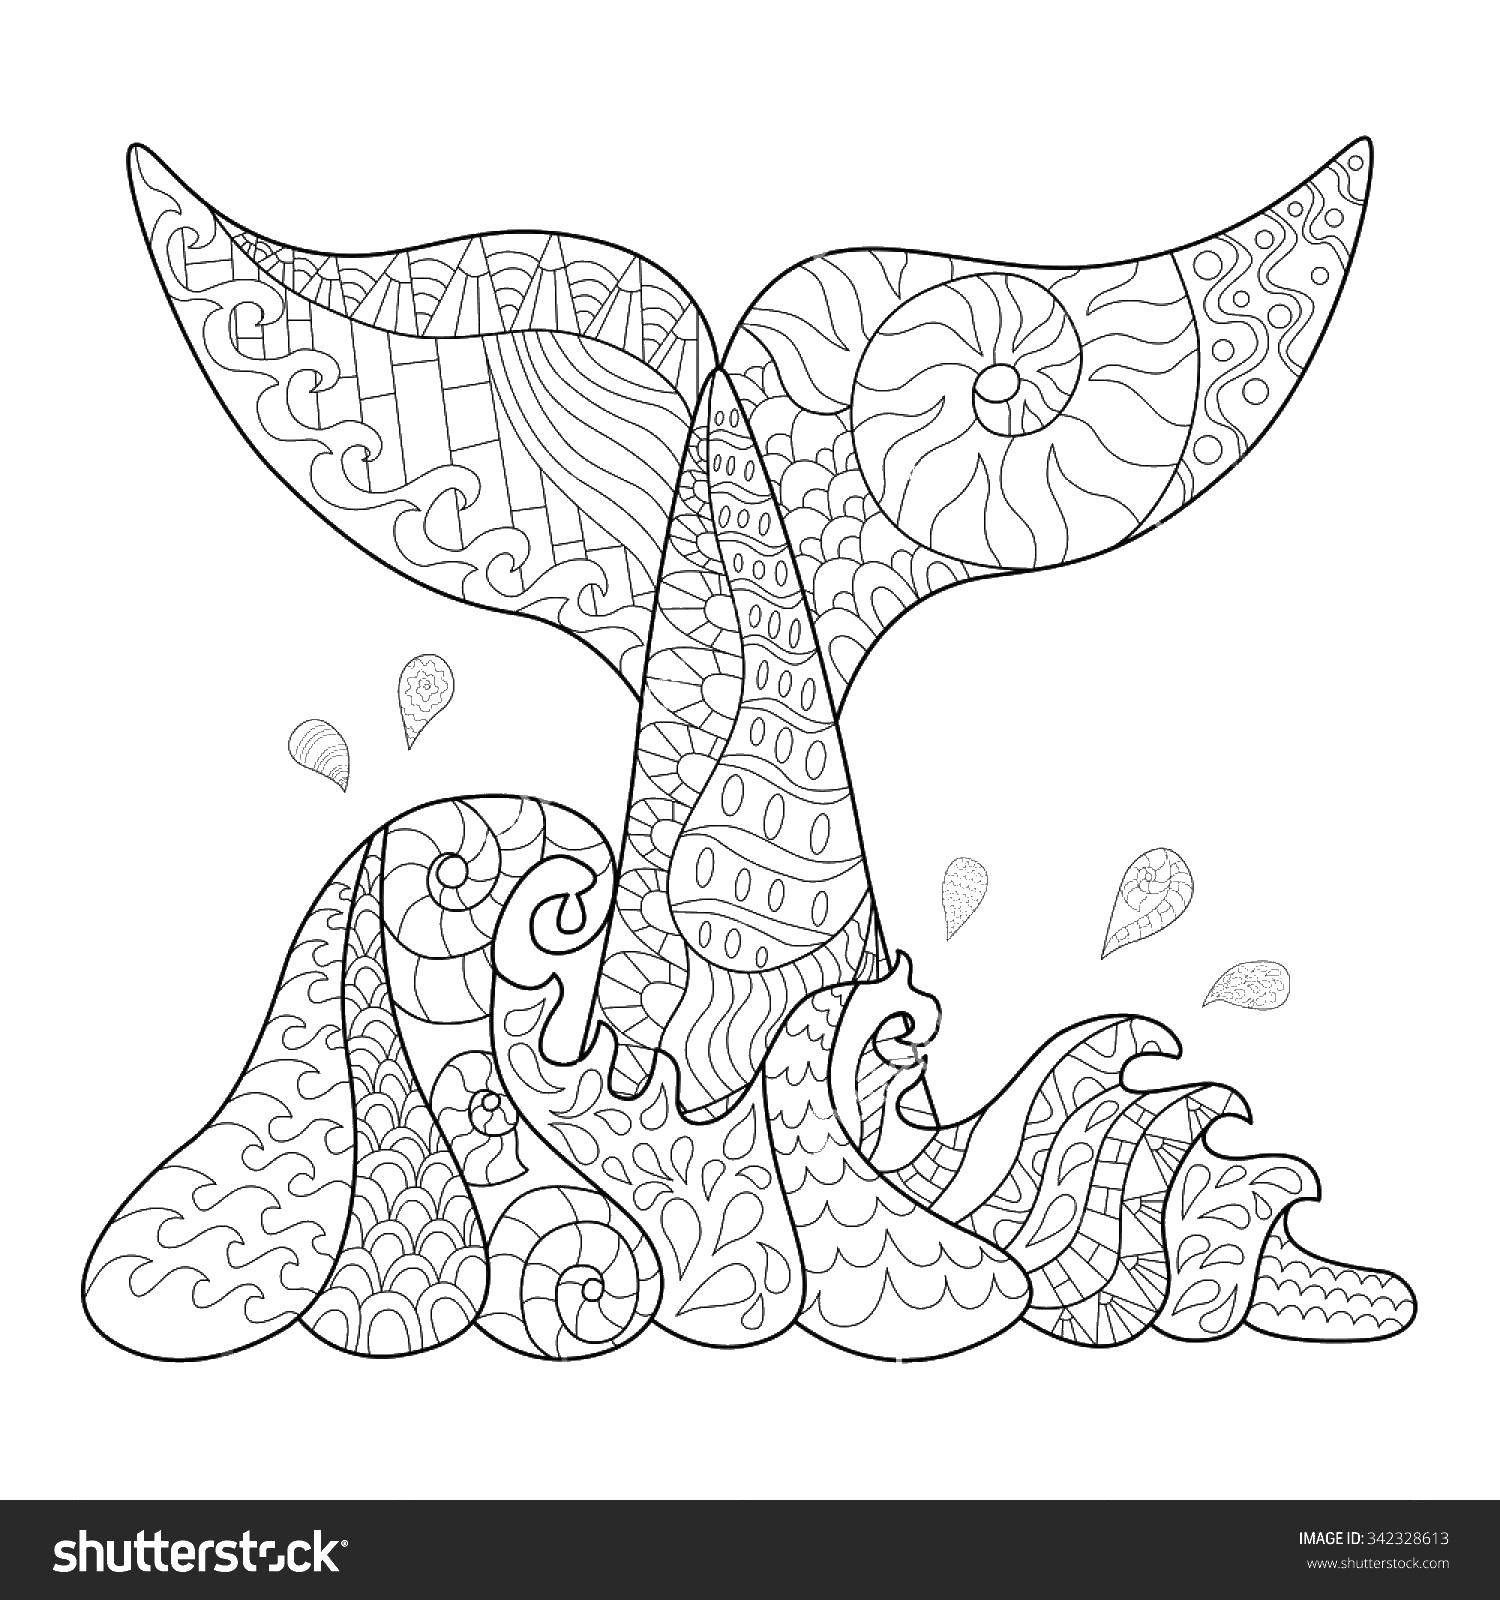 Coloring The tail and waves. Category coloring. Tags:  tail, waves, patterns.